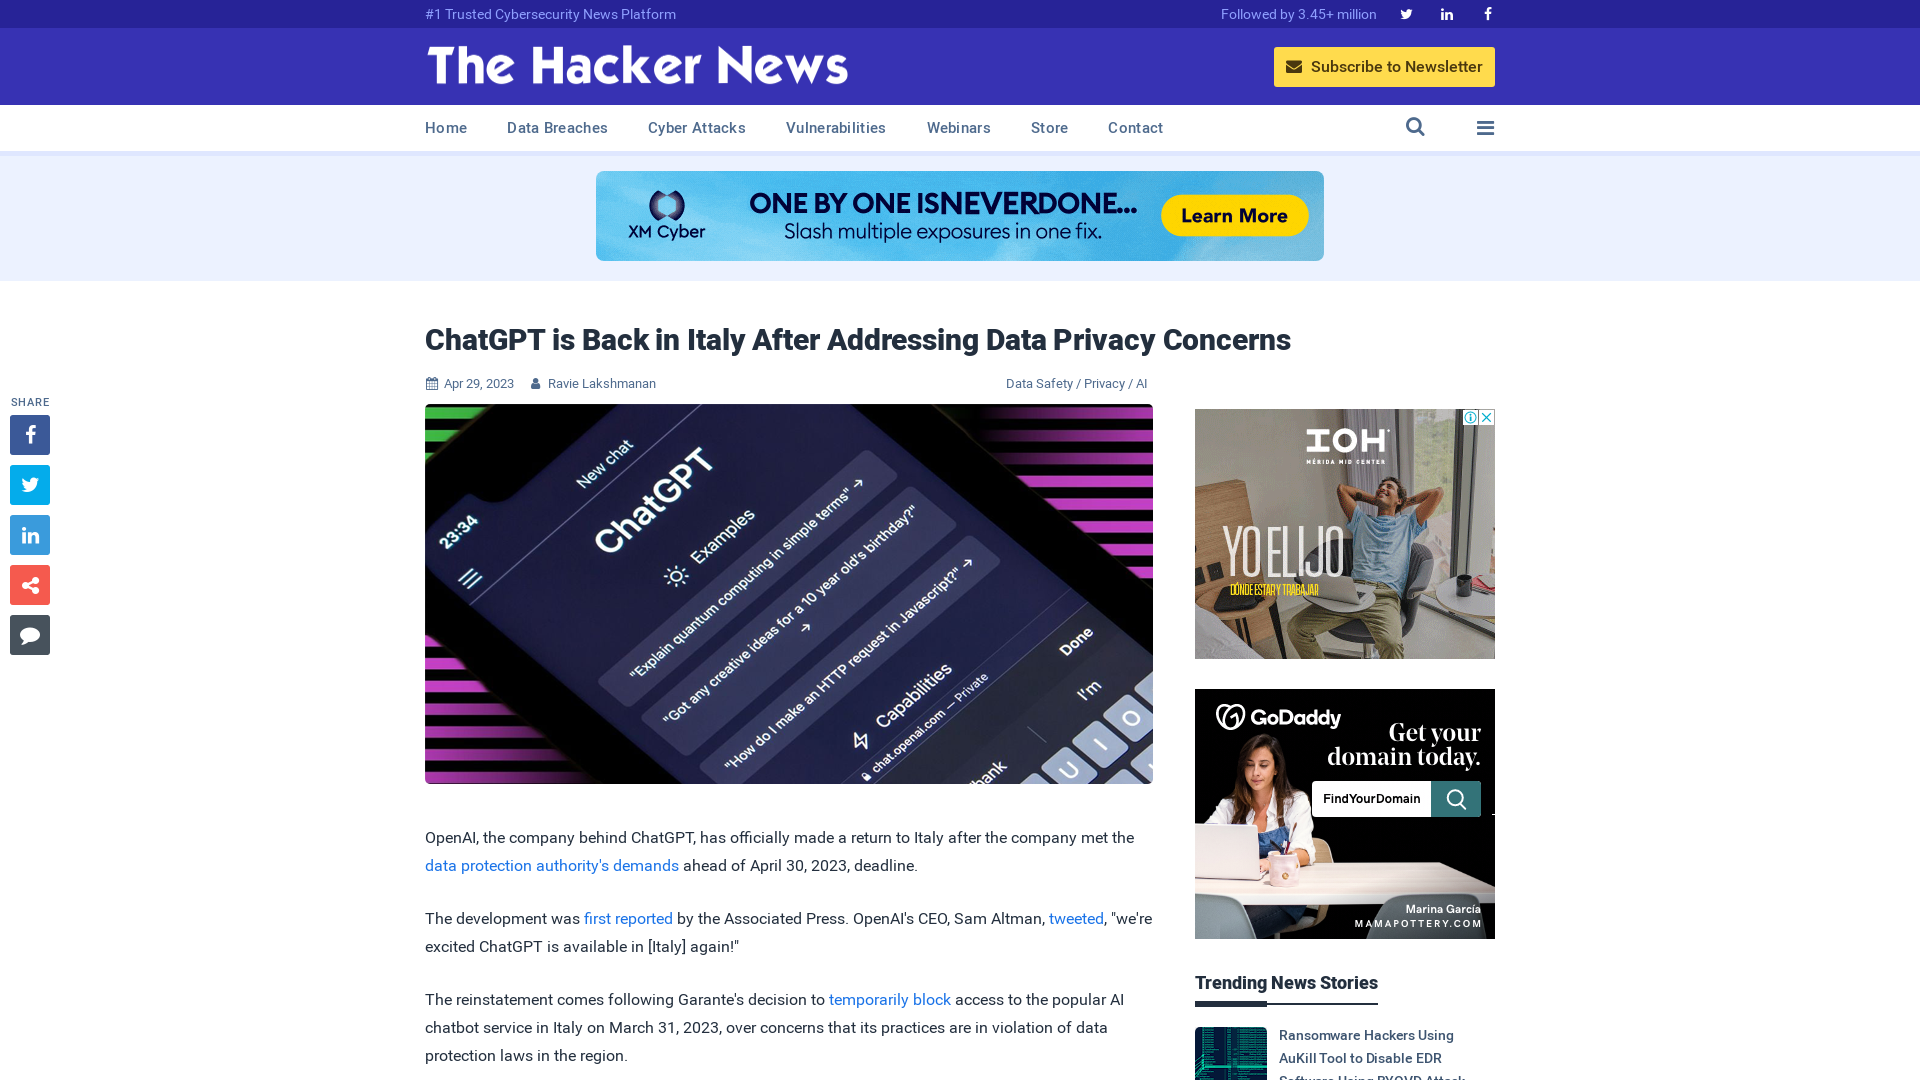 ChatGPT is Back in Italy After Addressing Data Privacy Concerns